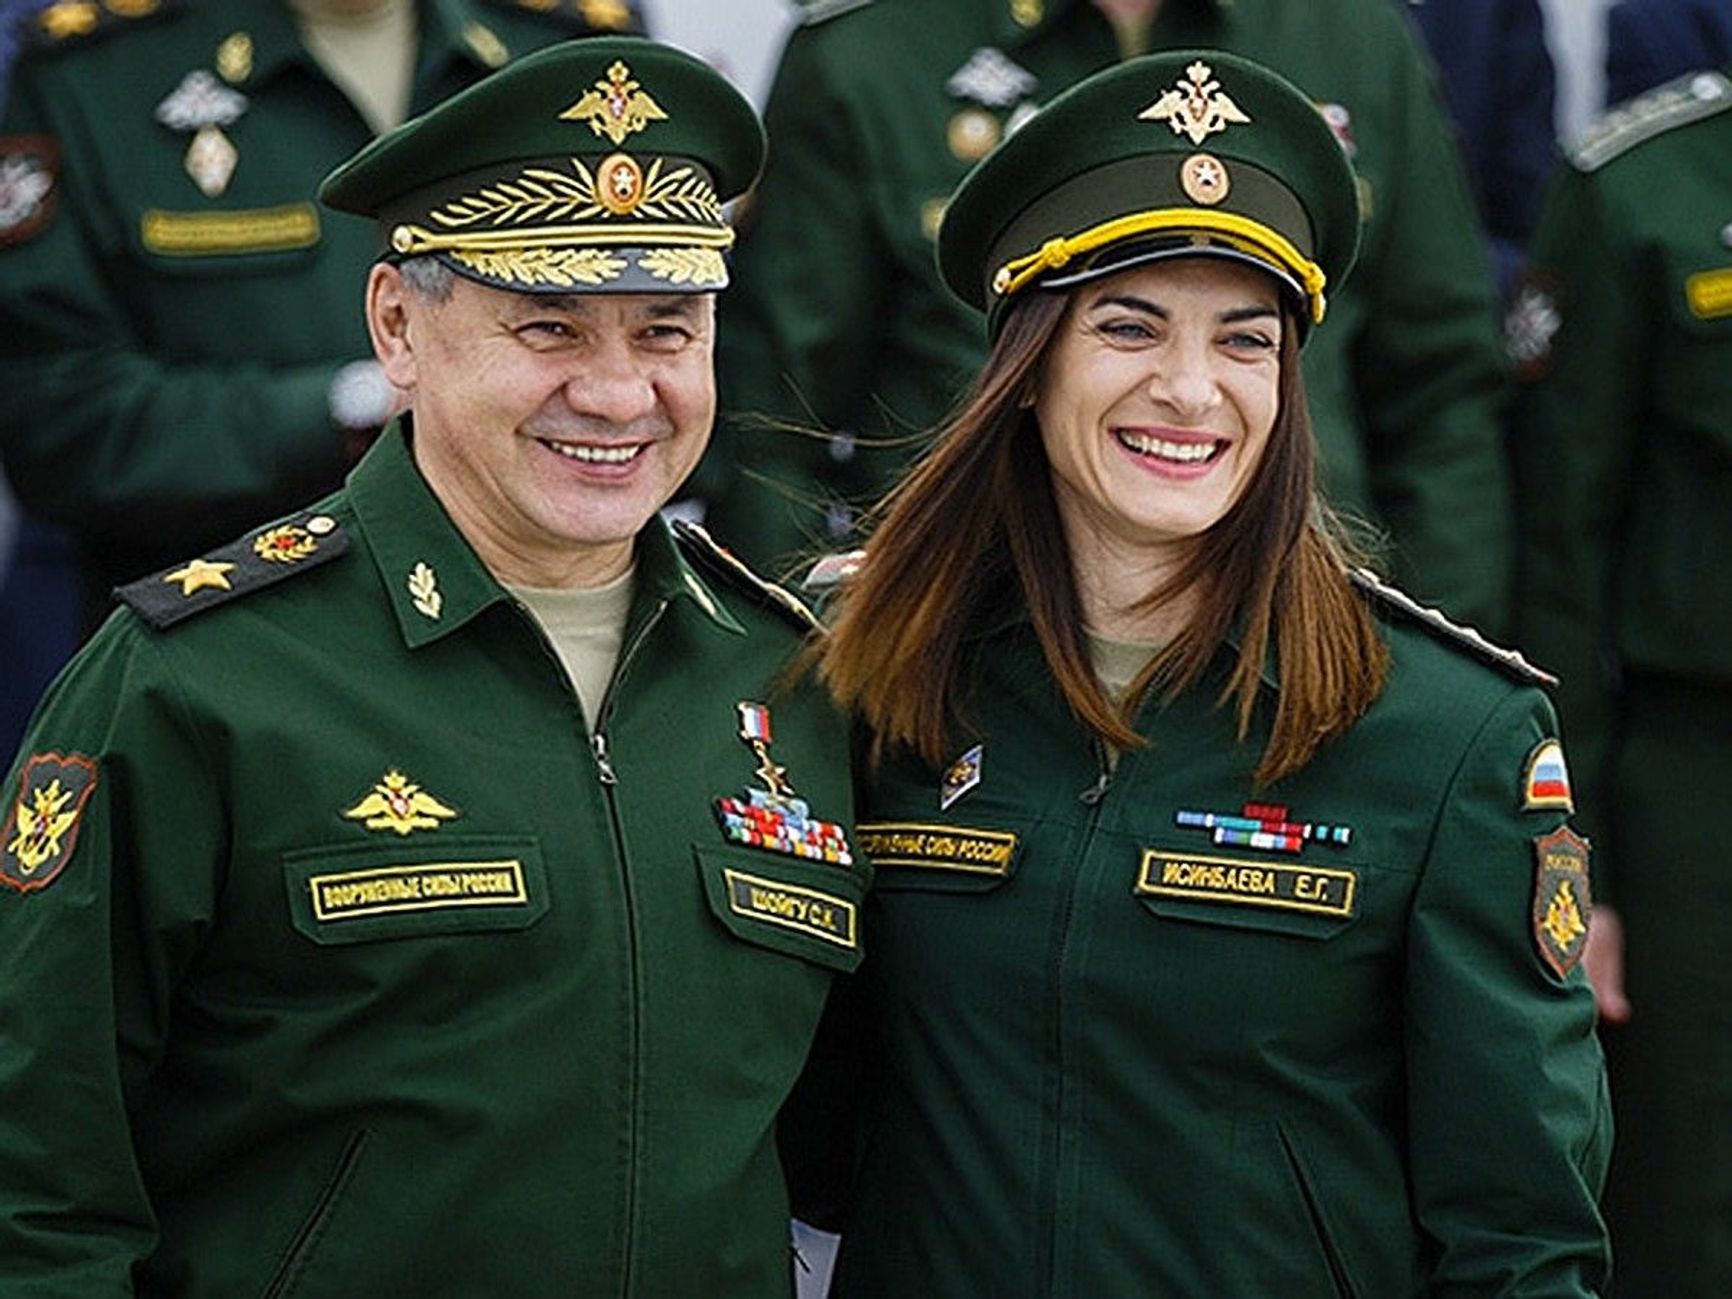 Yelena Isinbayeva was promoted to the rank of Major by Defense Minister Sergei Shoigu in 2015